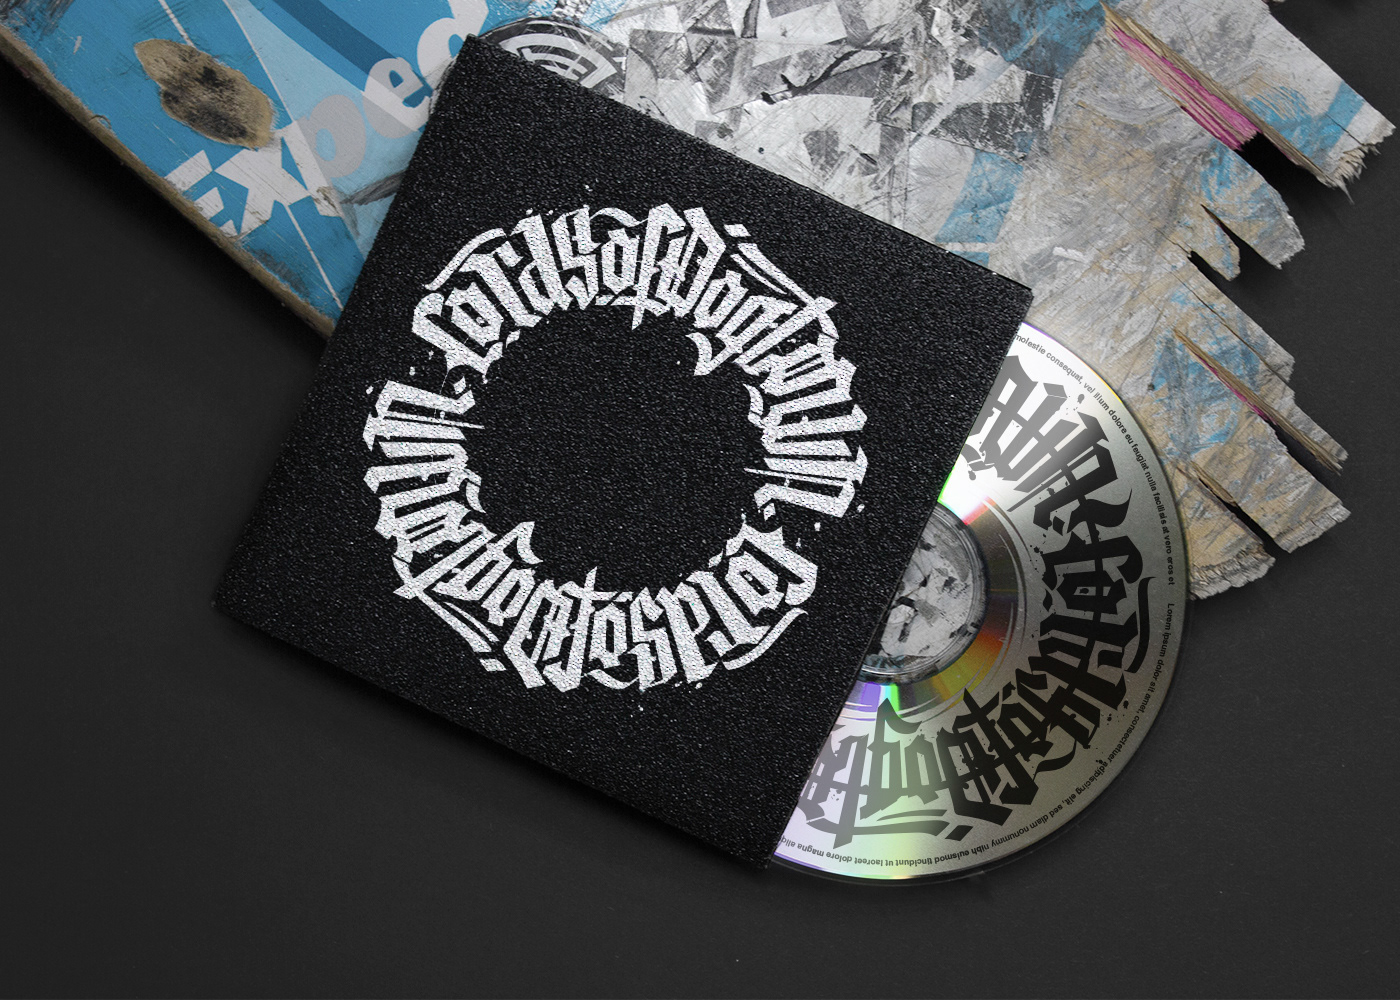 CD cover album cover dvd cover Calligraphy   lettering typography   skateboard Packaging movie